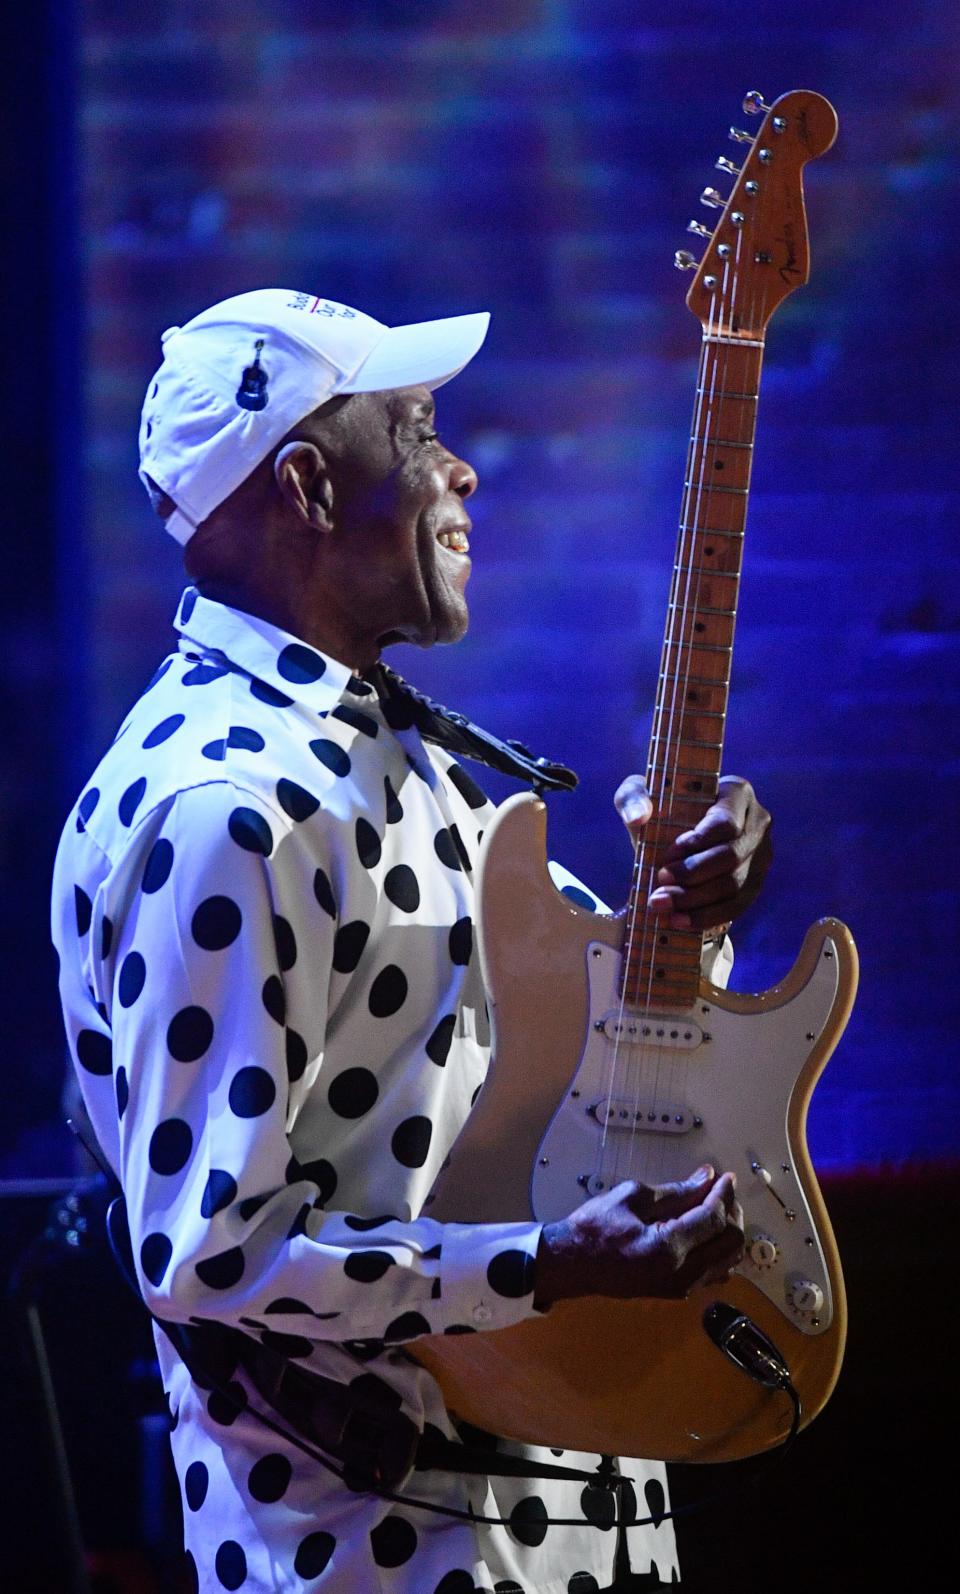 Buddy Guy performs during the 17th annual Americana Honors & Awards show at the Ryman Auditorium Sept. 12, 2018.